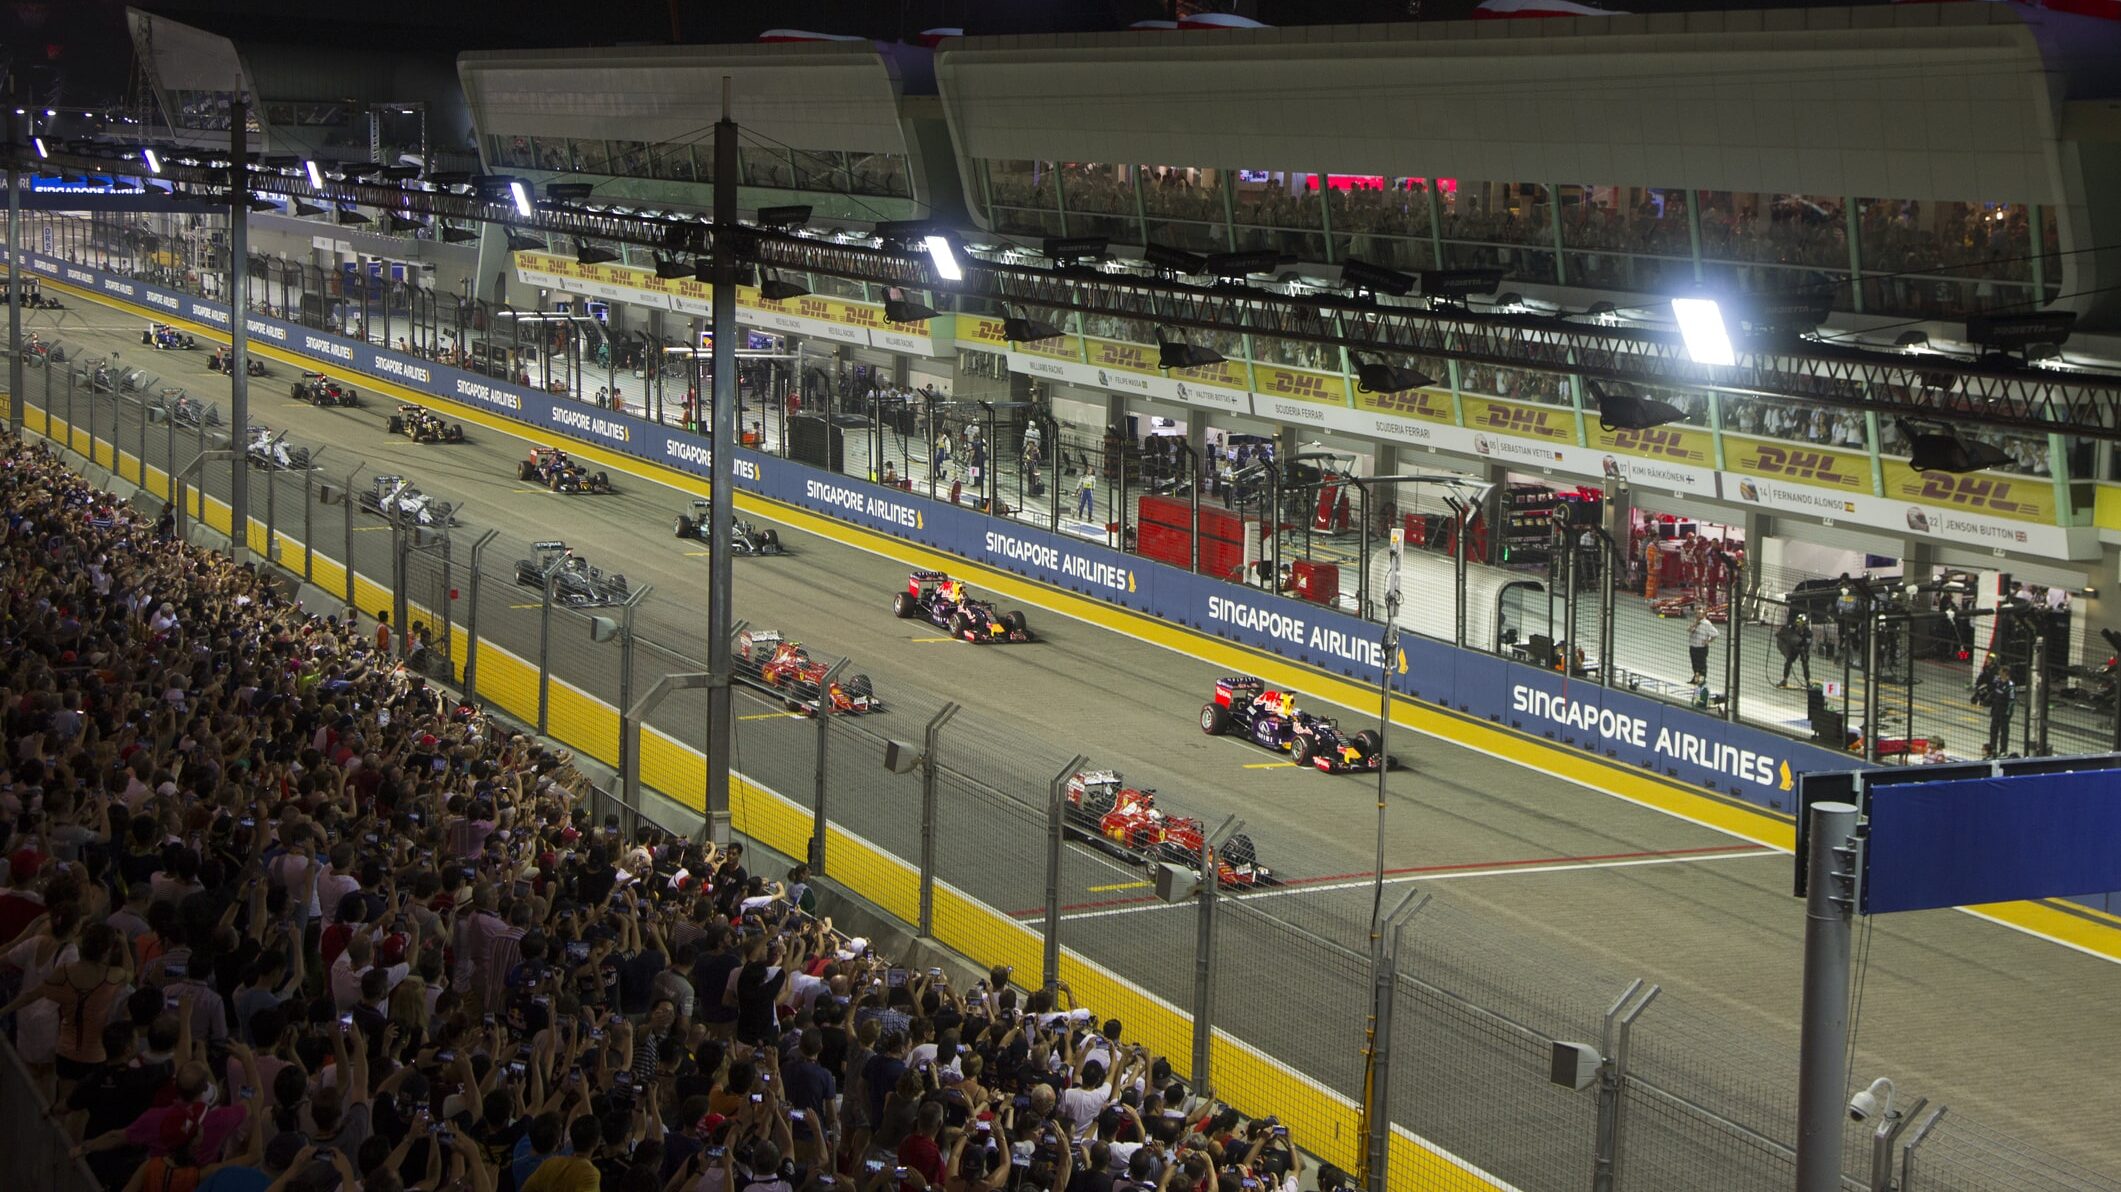 F1 drivers line up in their starting grids at Singapore Street Circuit Formula 1 Grand Prix